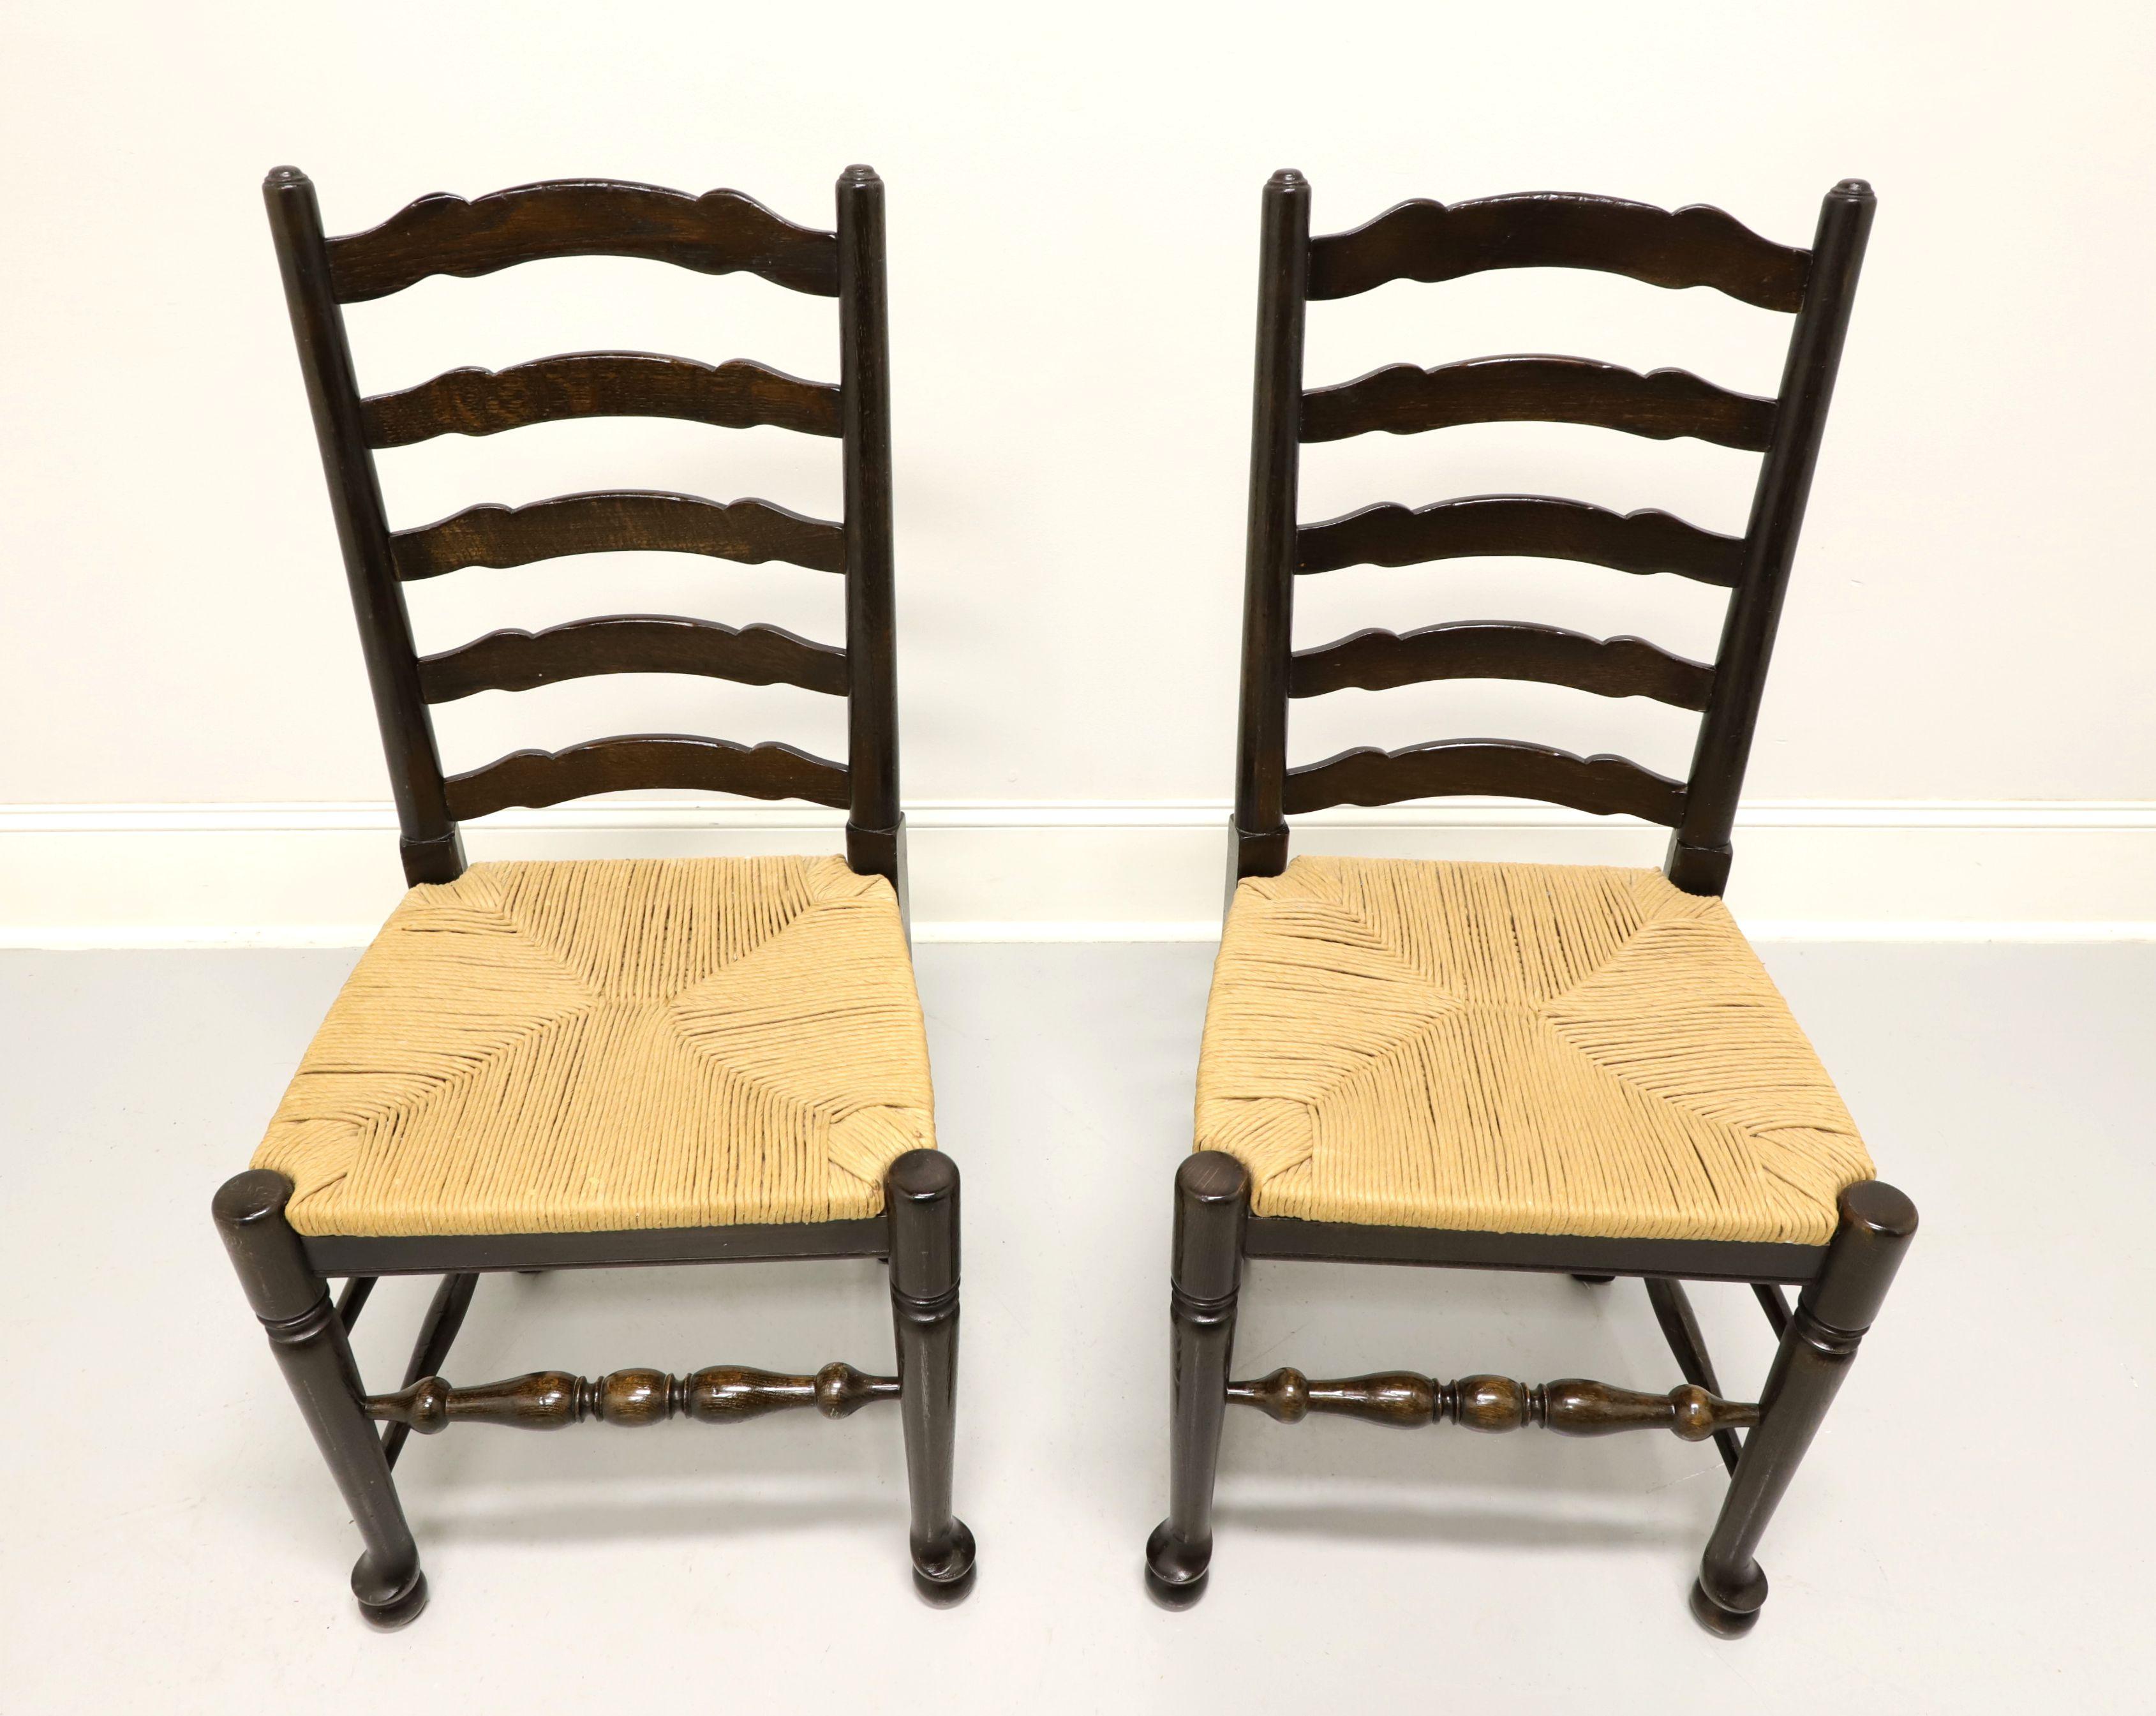 A pair of cottage style dining side chairs, unbranded, similar in quality to Ethan Allen. Walnut with carved ladder back design, rush seats, turned legs and stretchers. Made in the USA, in the mid 20th century.

Measures: Overall: 19 W 18 D 39.5 H,